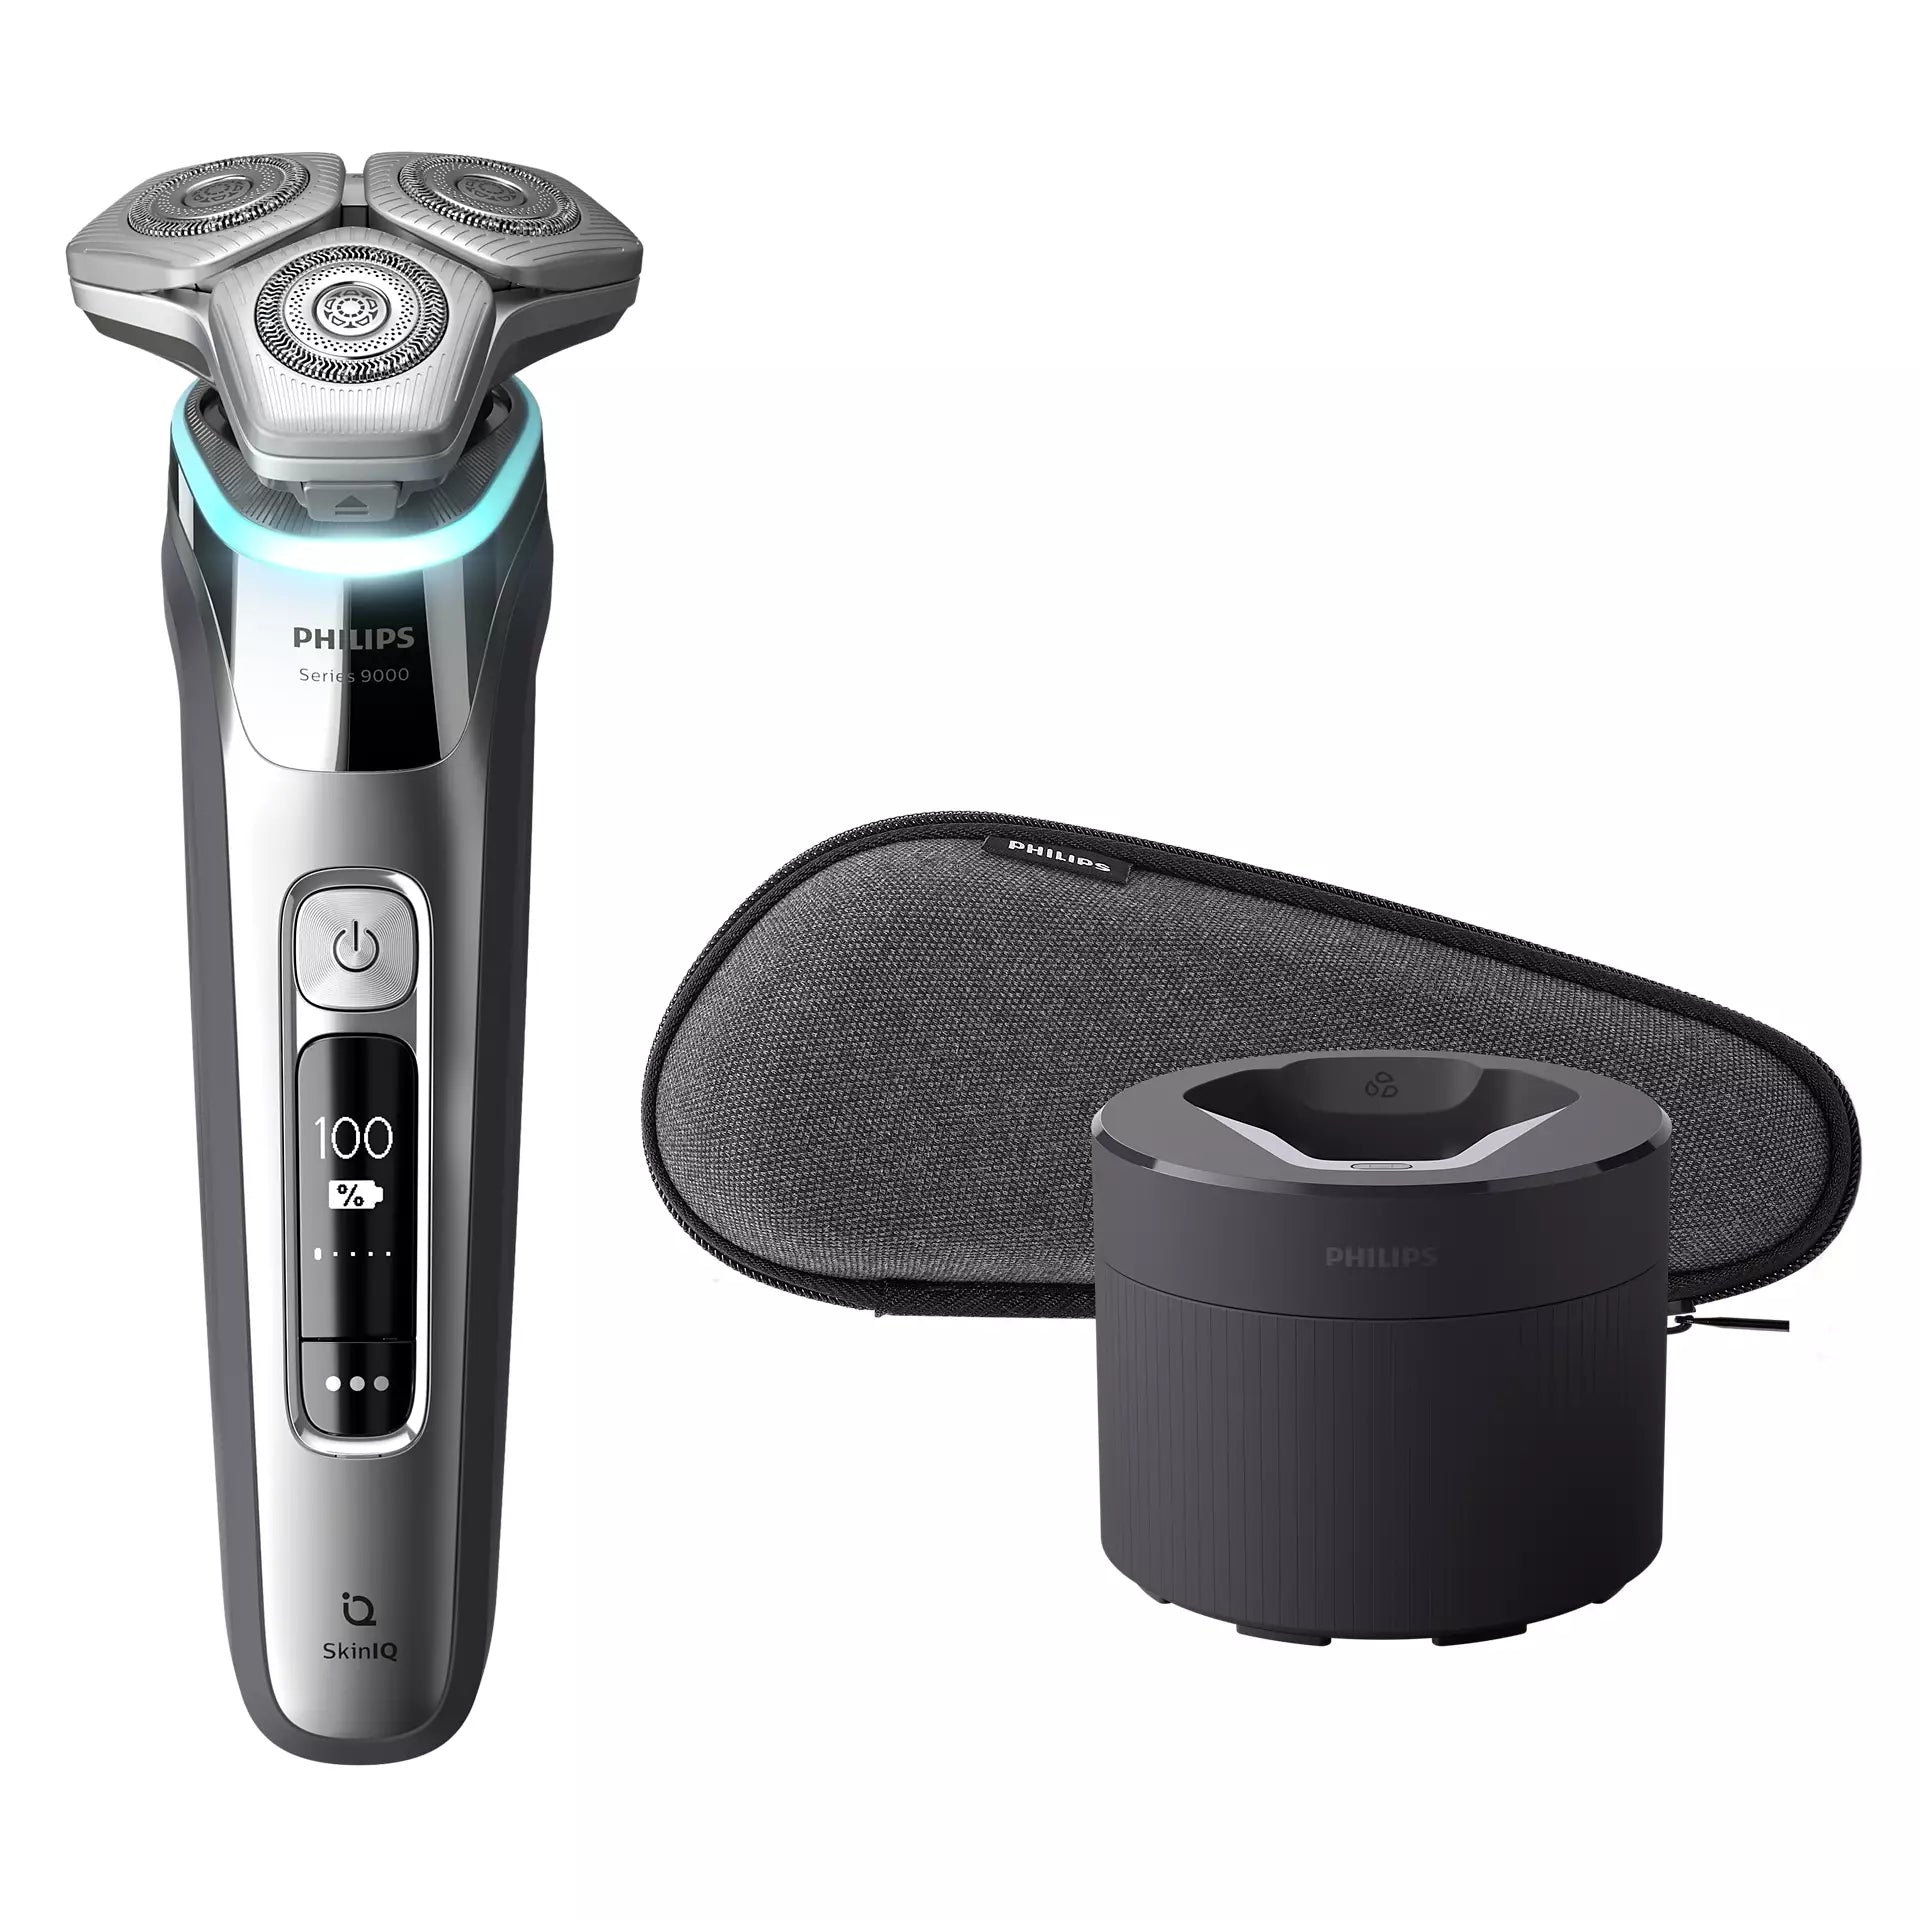 Philips series 3000 Philips shaver wet and dry/New Model S3333/54 - Review  